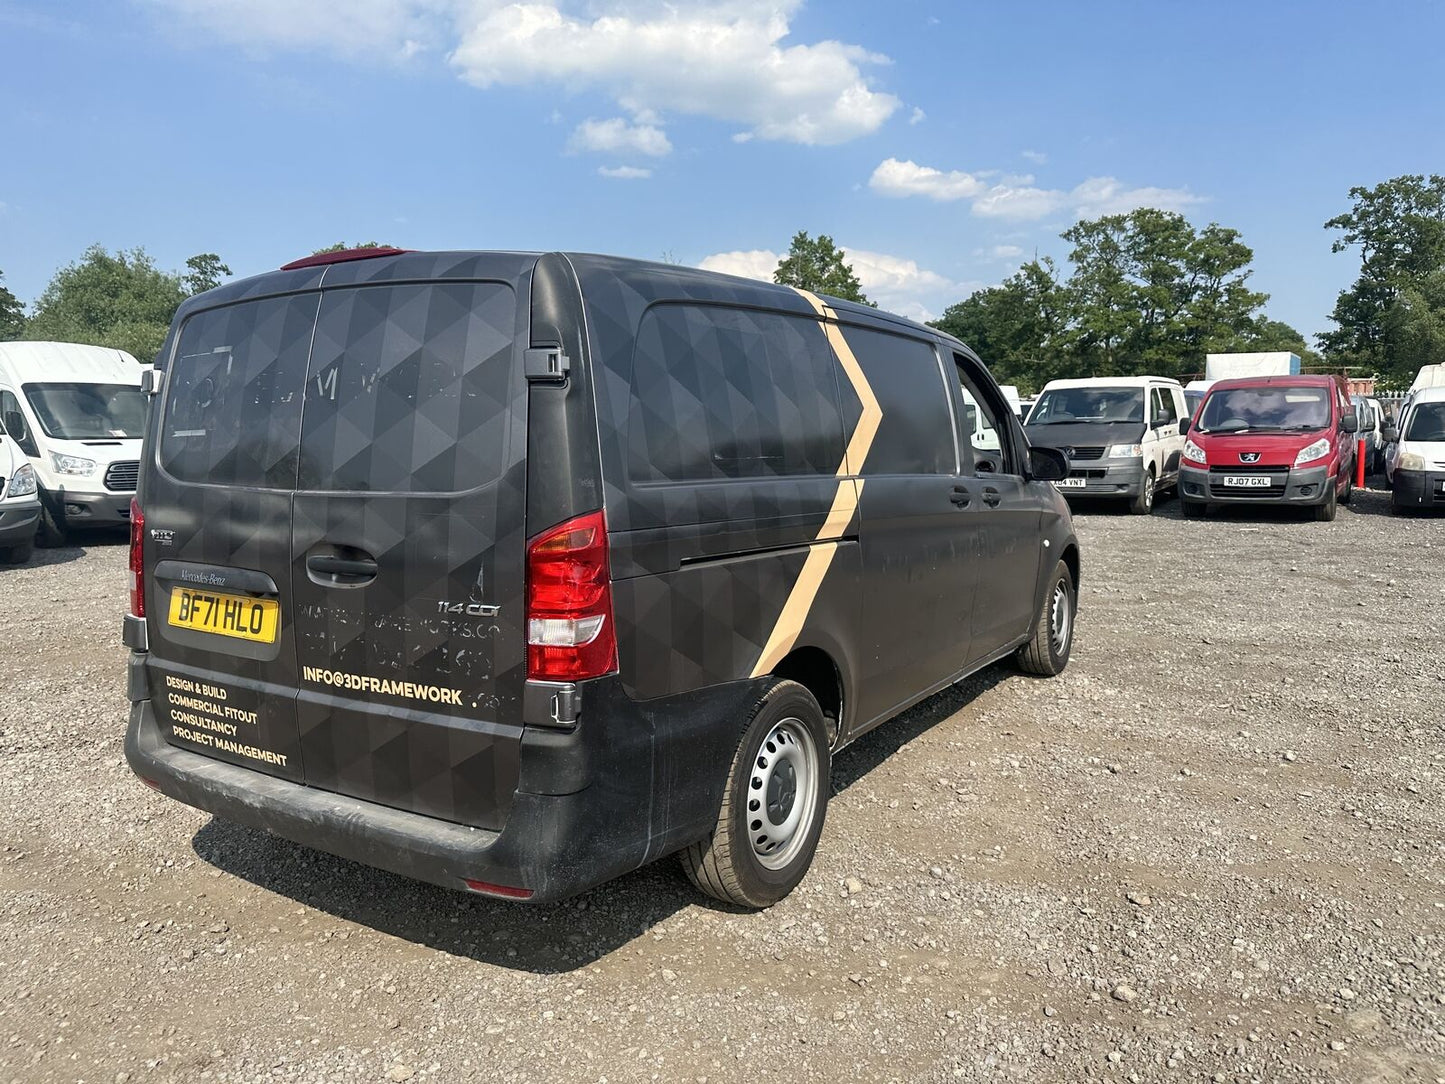 Bid on **((ONLY 2443 MILES))** PERFECT CONDITION: 71 PLATE MERCEDES VITO DIESEL RWD VAN (NO VAT ON HAMMER)- Buy &amp; Sell on Auction with EAMA Group